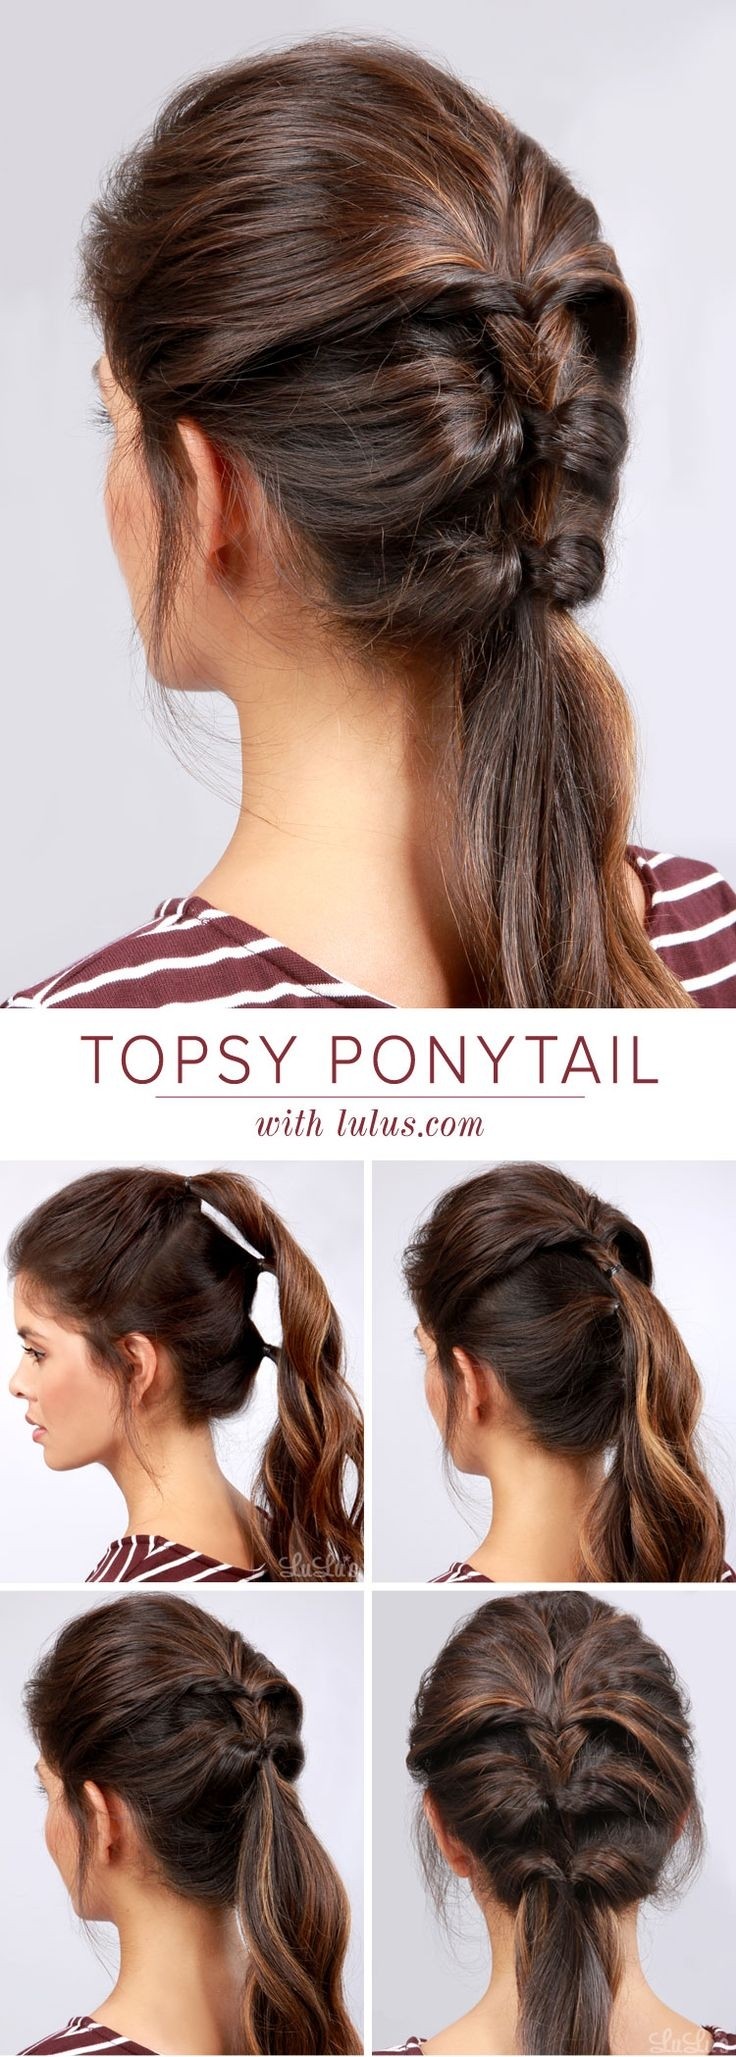 Topsy ponytail hairstyle tutorial